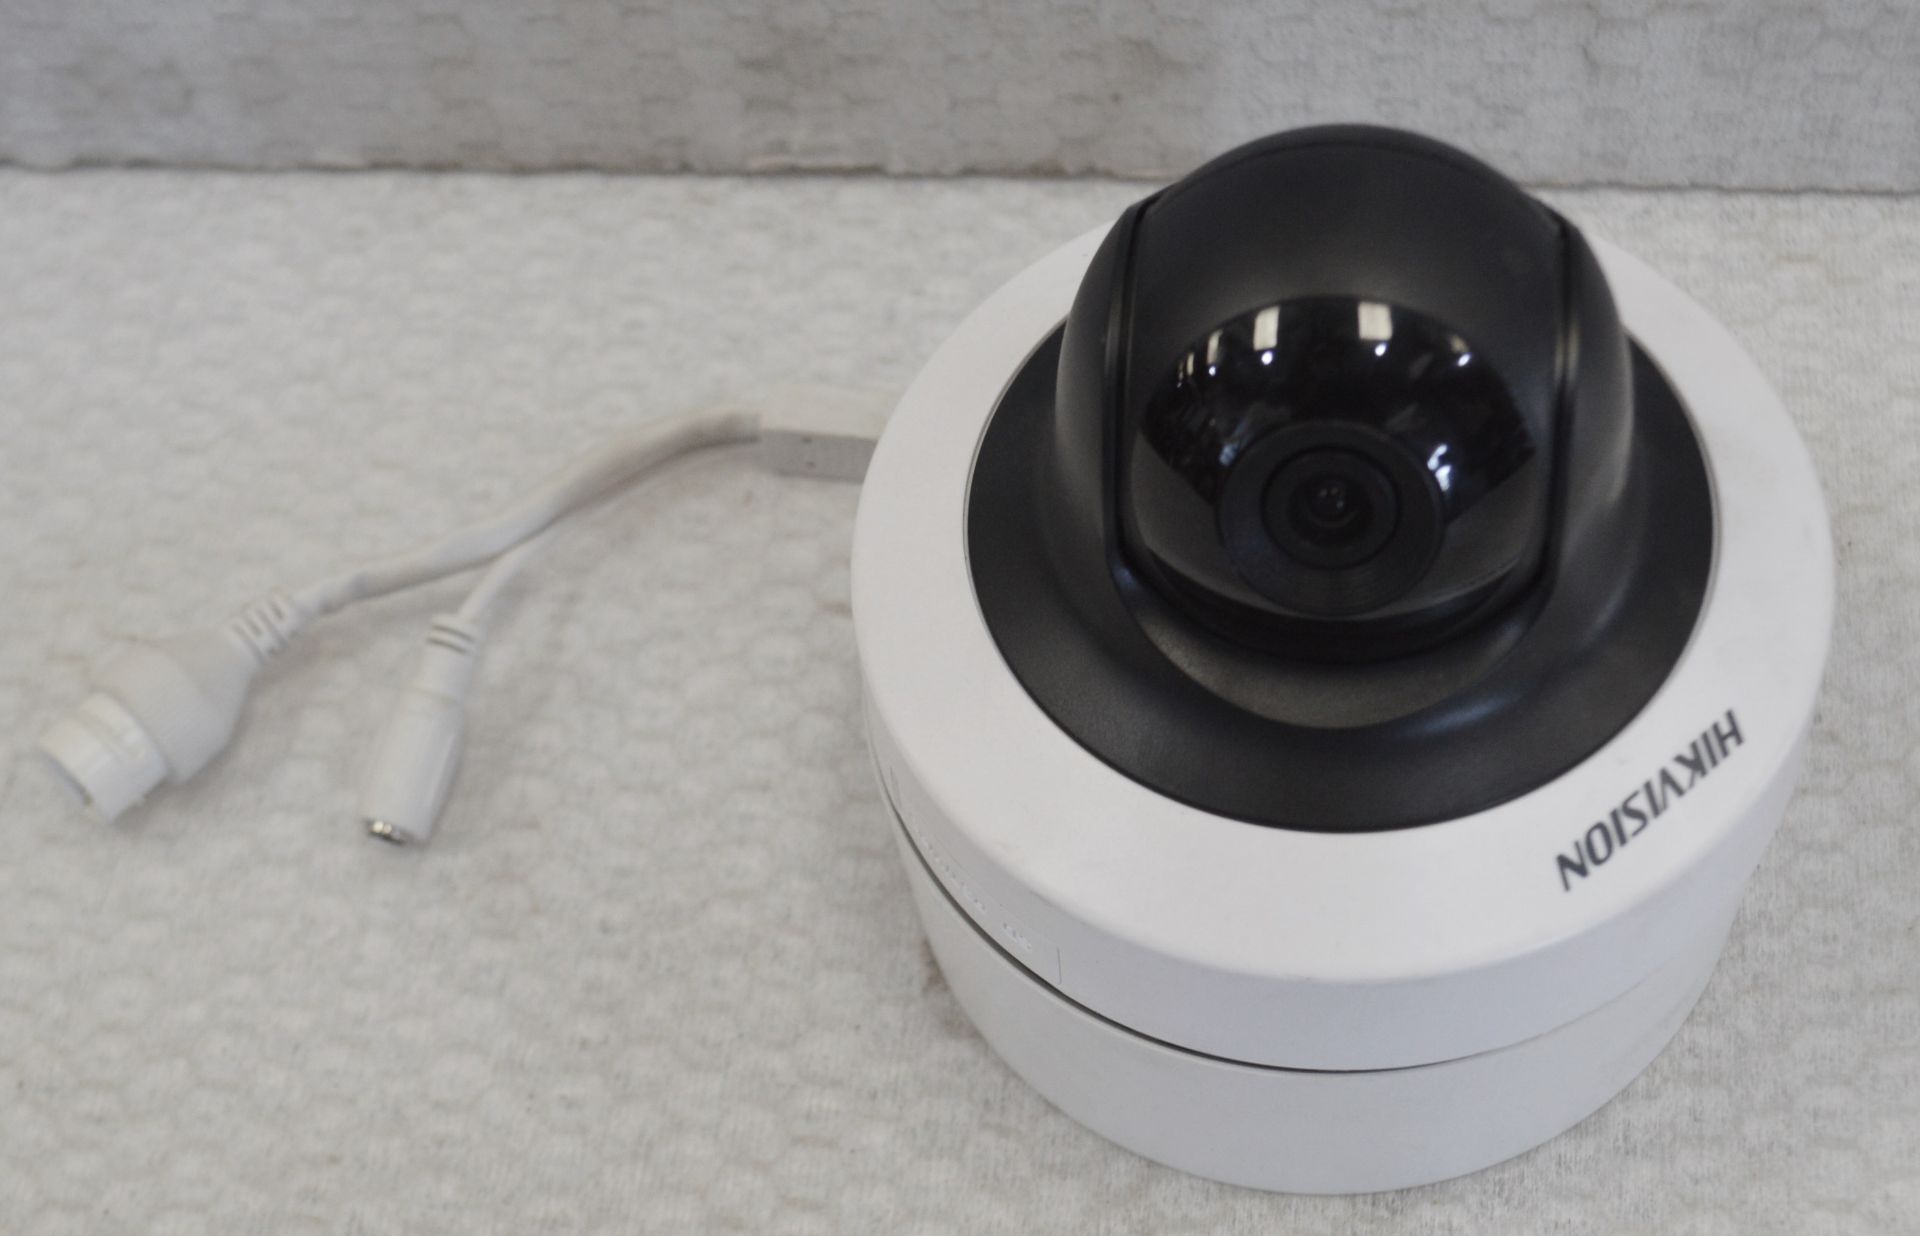 10 x Hikvision Full HD Day/Night Pan/Tilt Network Dome CCTV Security Cameras - Model number: DS- - Image 3 of 7